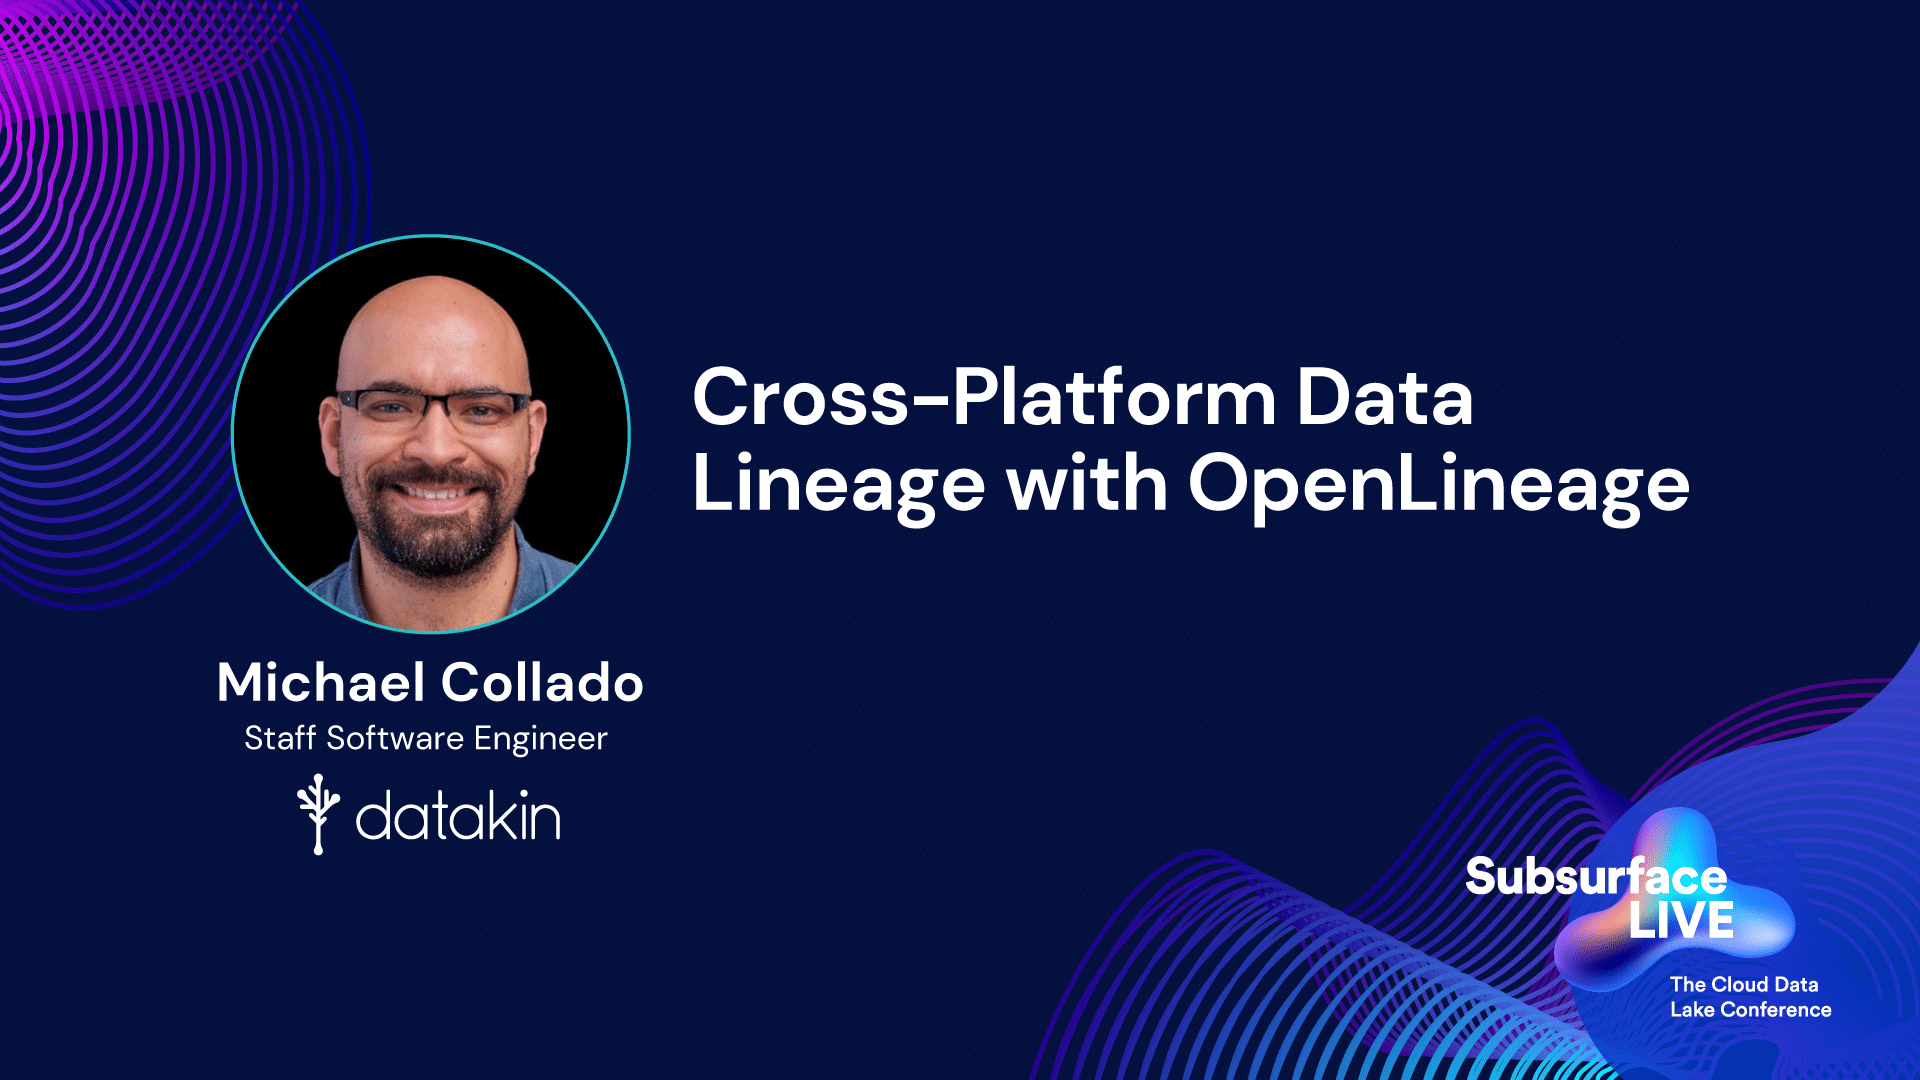 Cross-Platform Lineage with OpenLineage